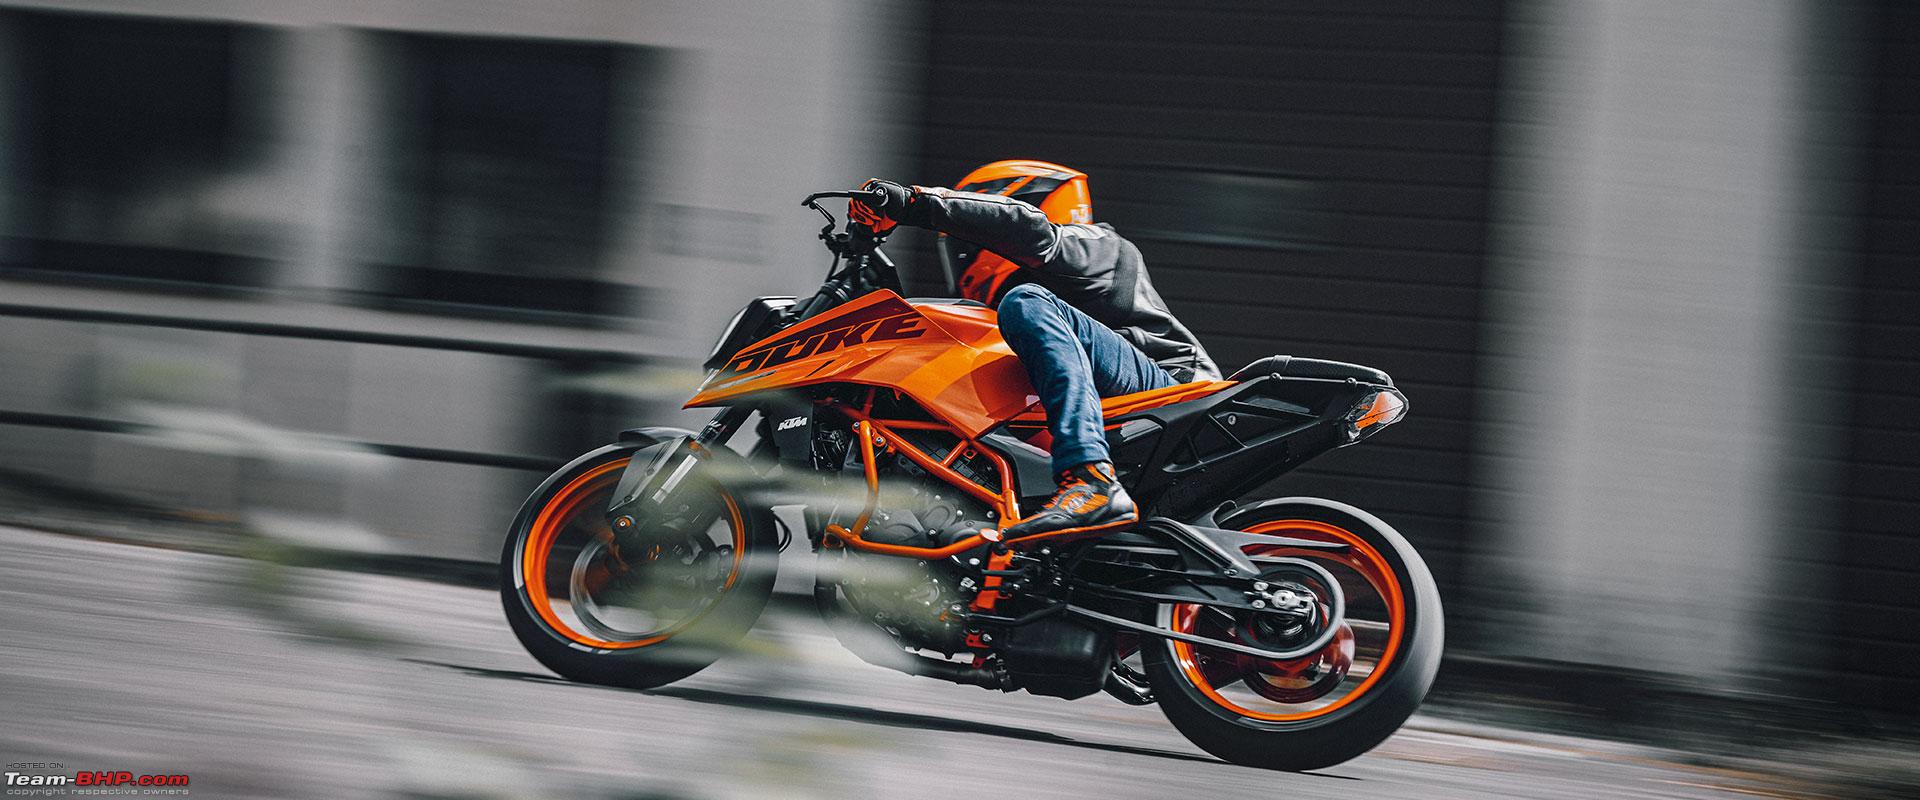 Electric KTM Duke motorcycle soon; may be made in India